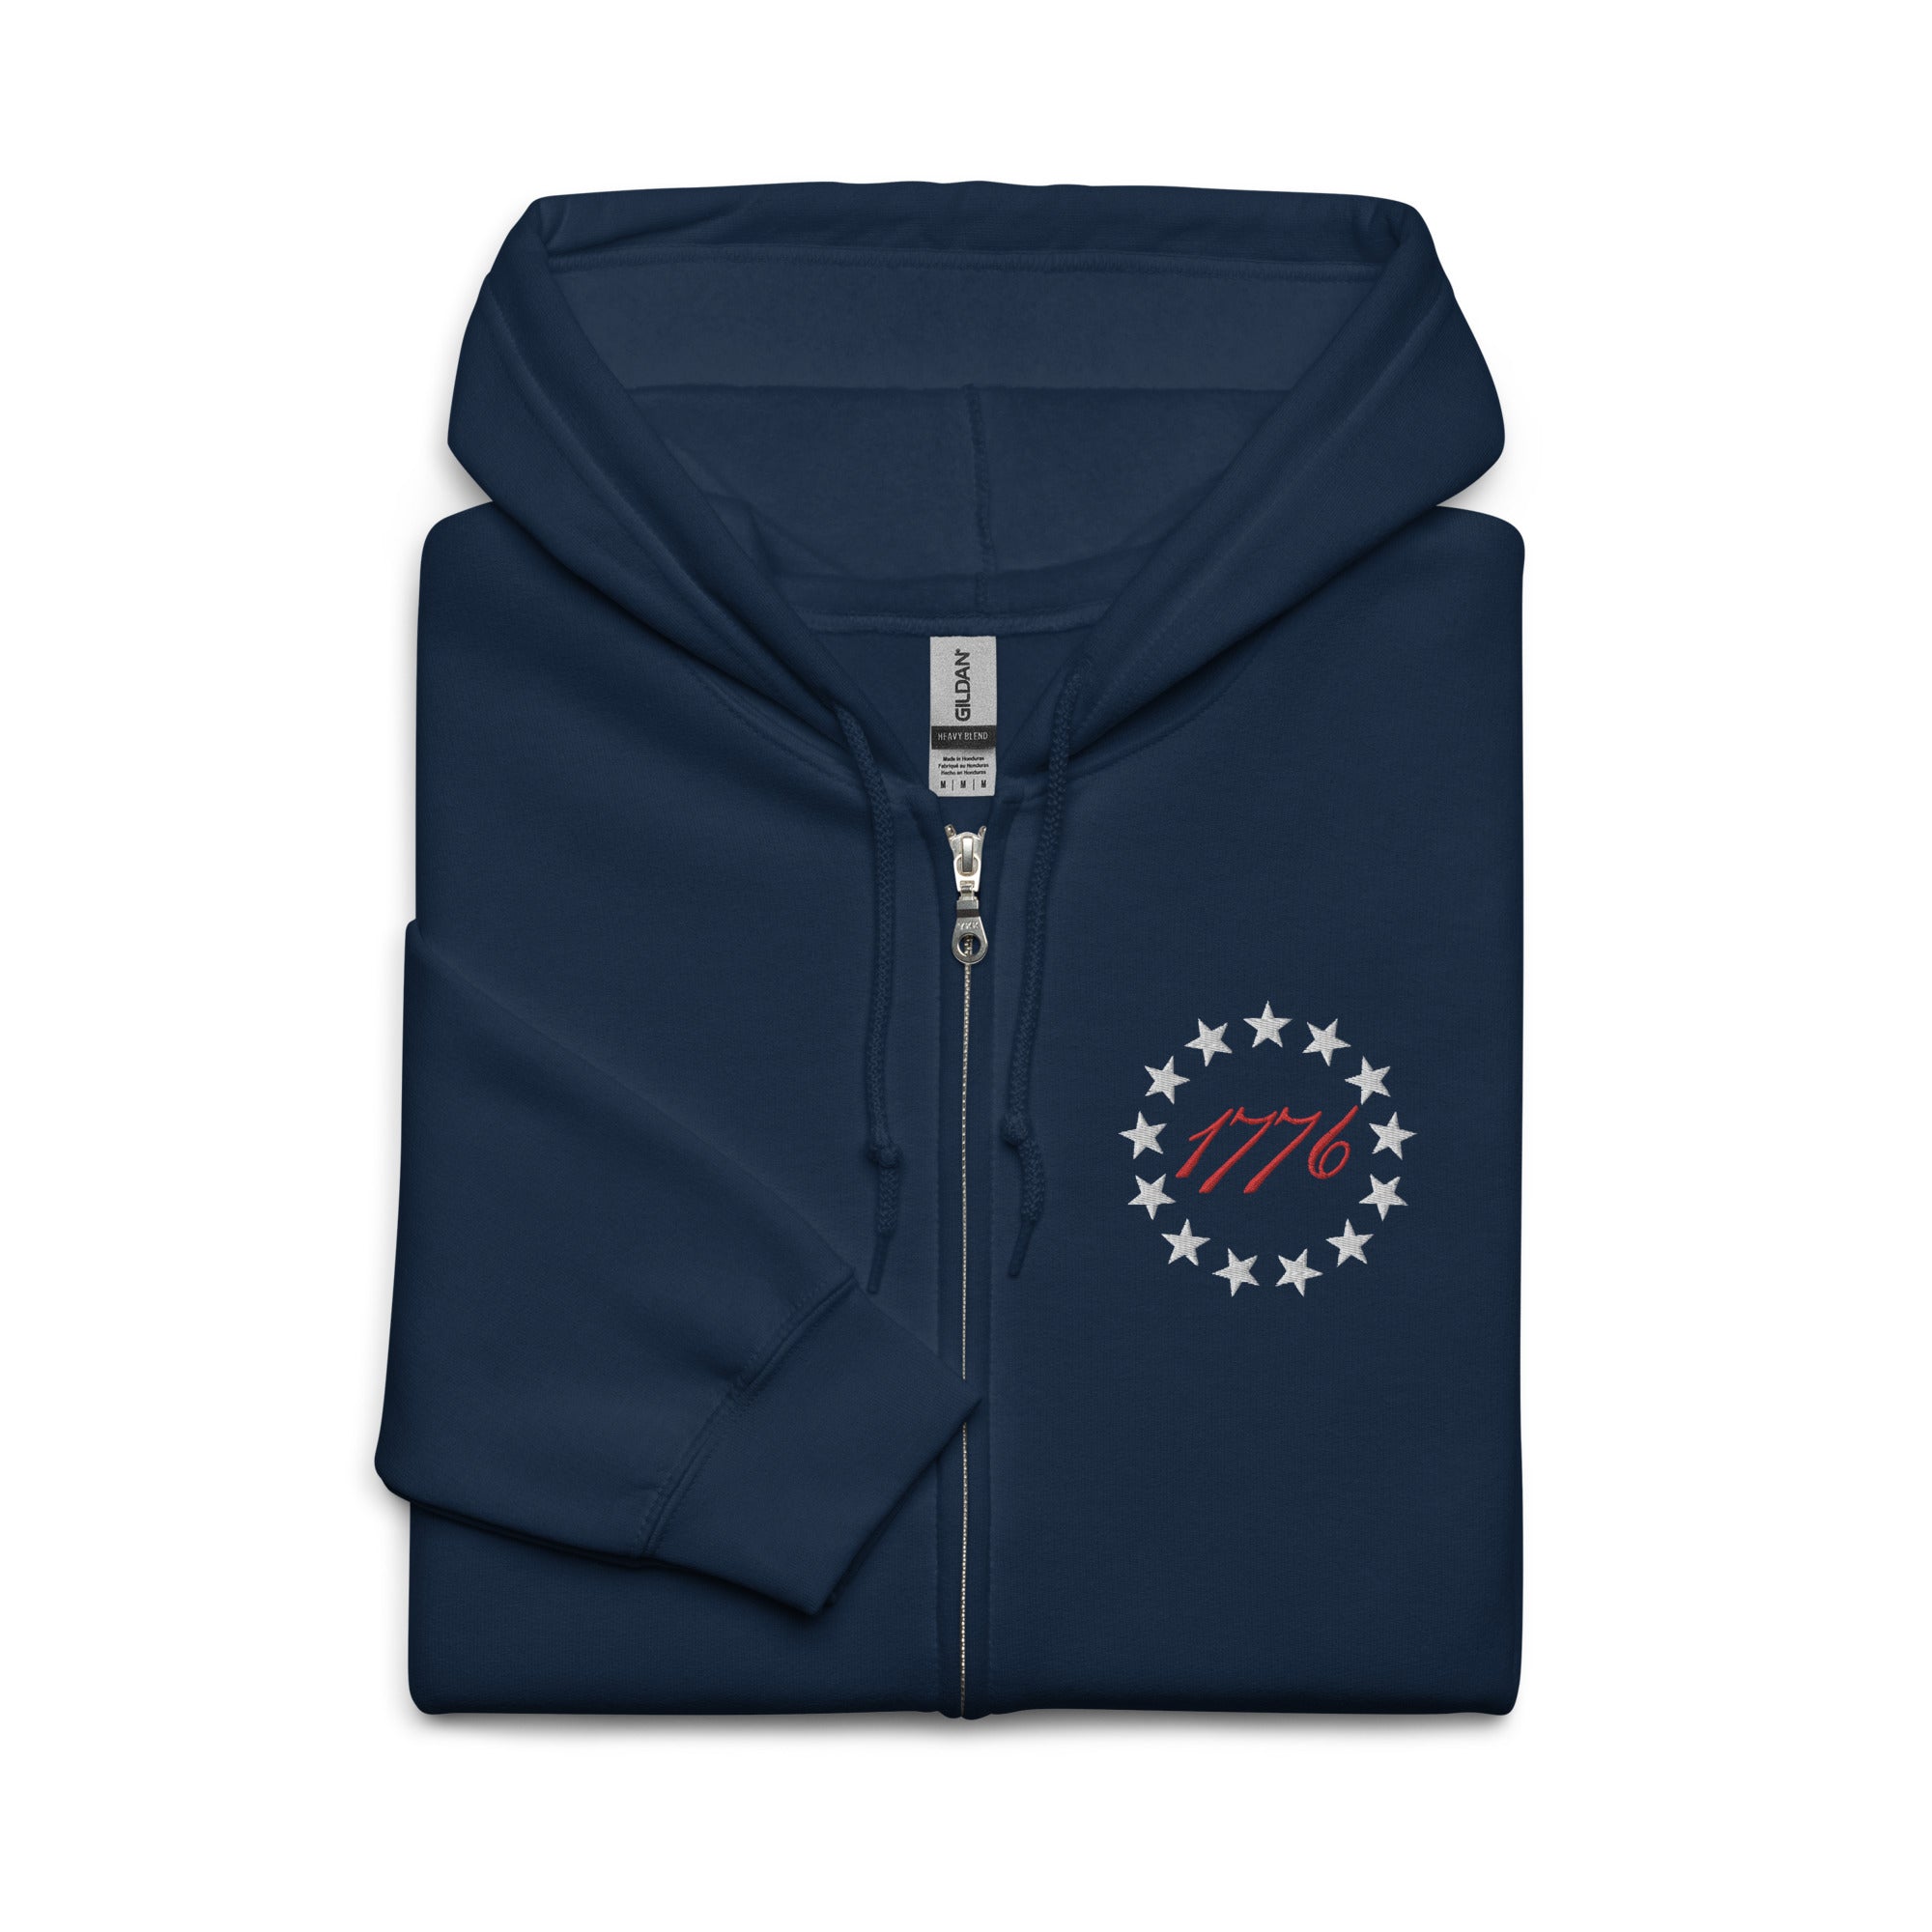 Betsy Ross 1776 Embroidered Heavy Blend Zip Hoodie